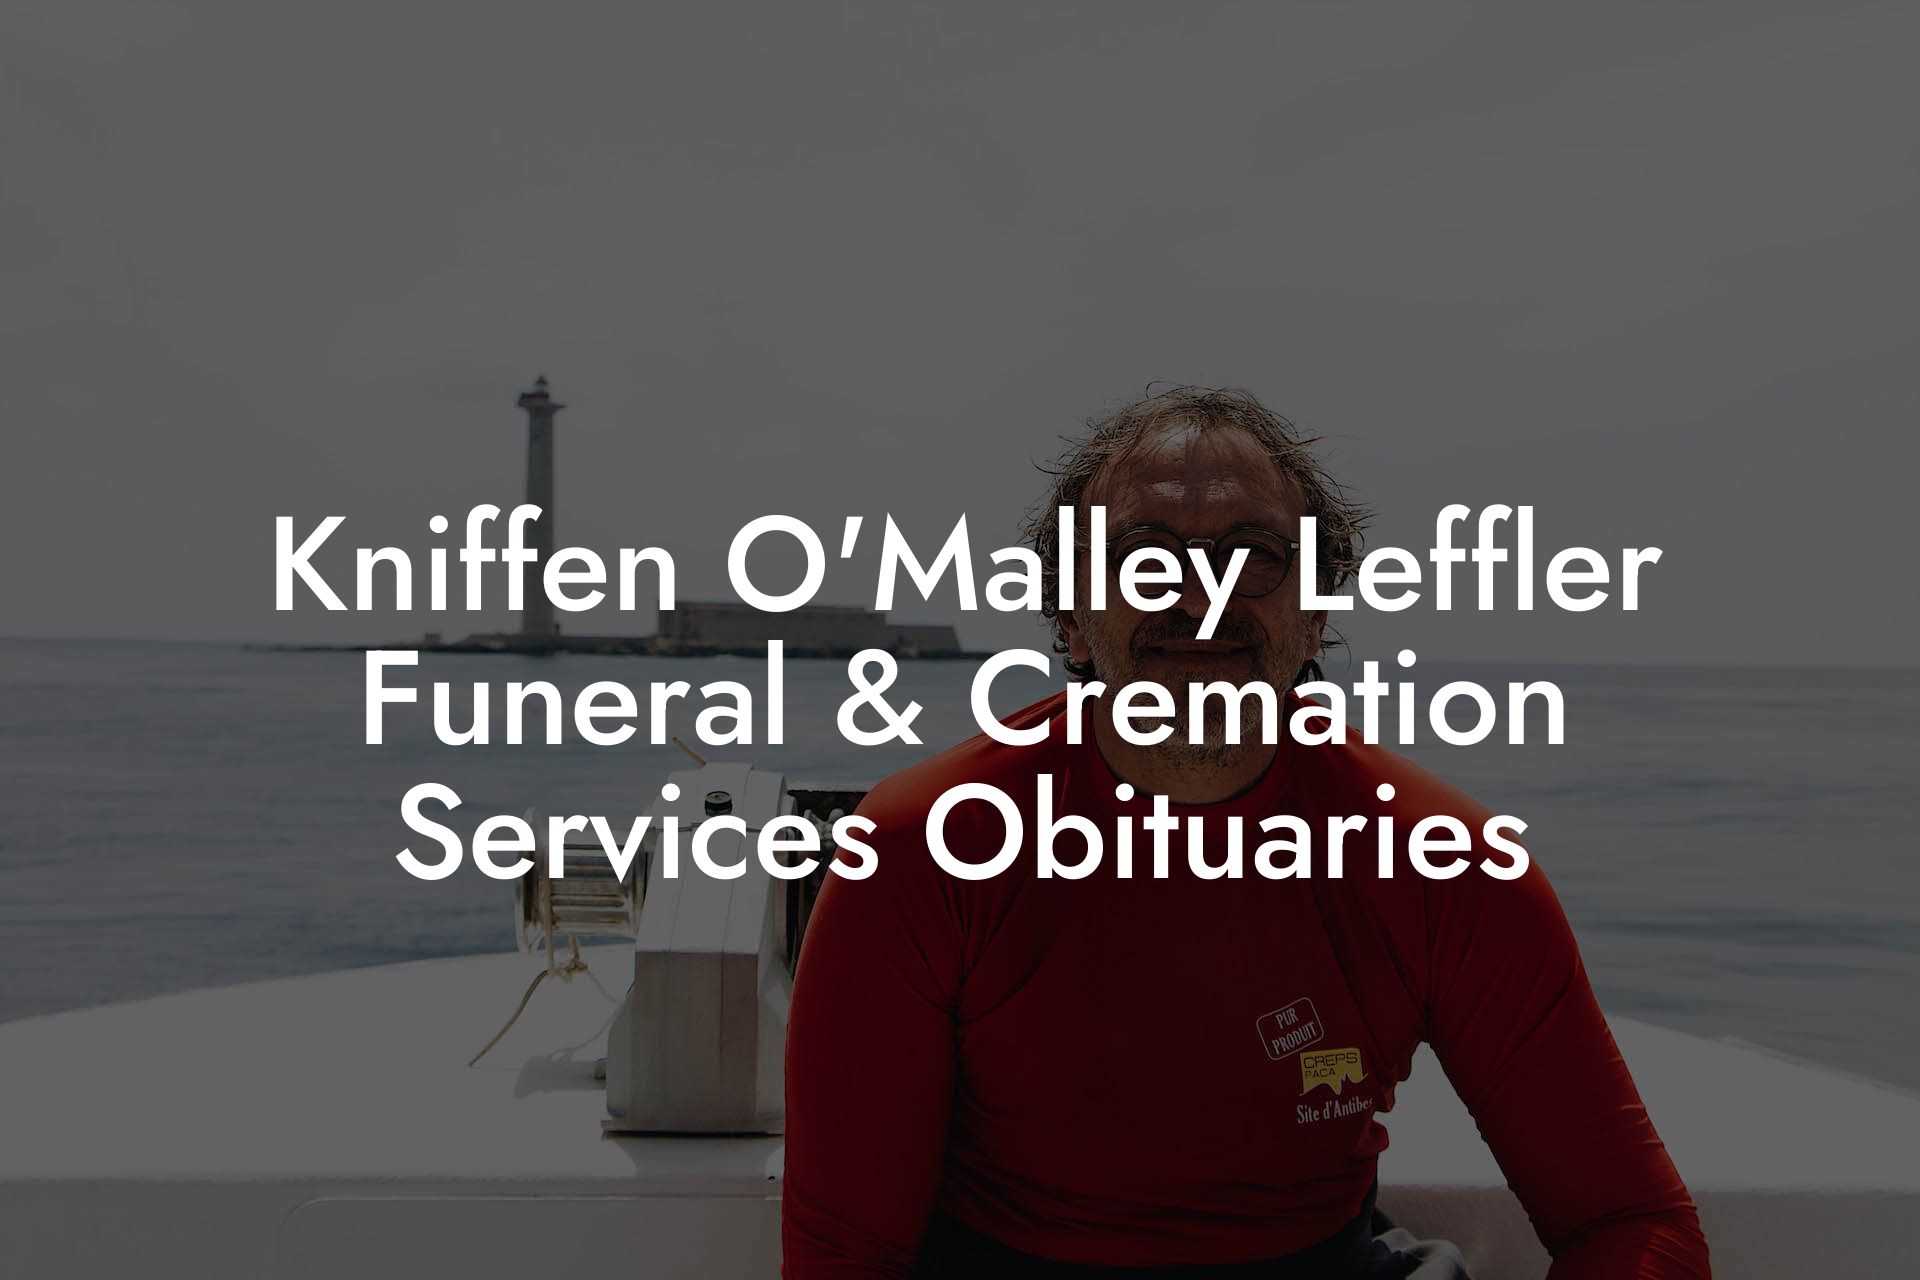 Kniffen O'Malley Leffler Funeral & Cremation Services Obituaries